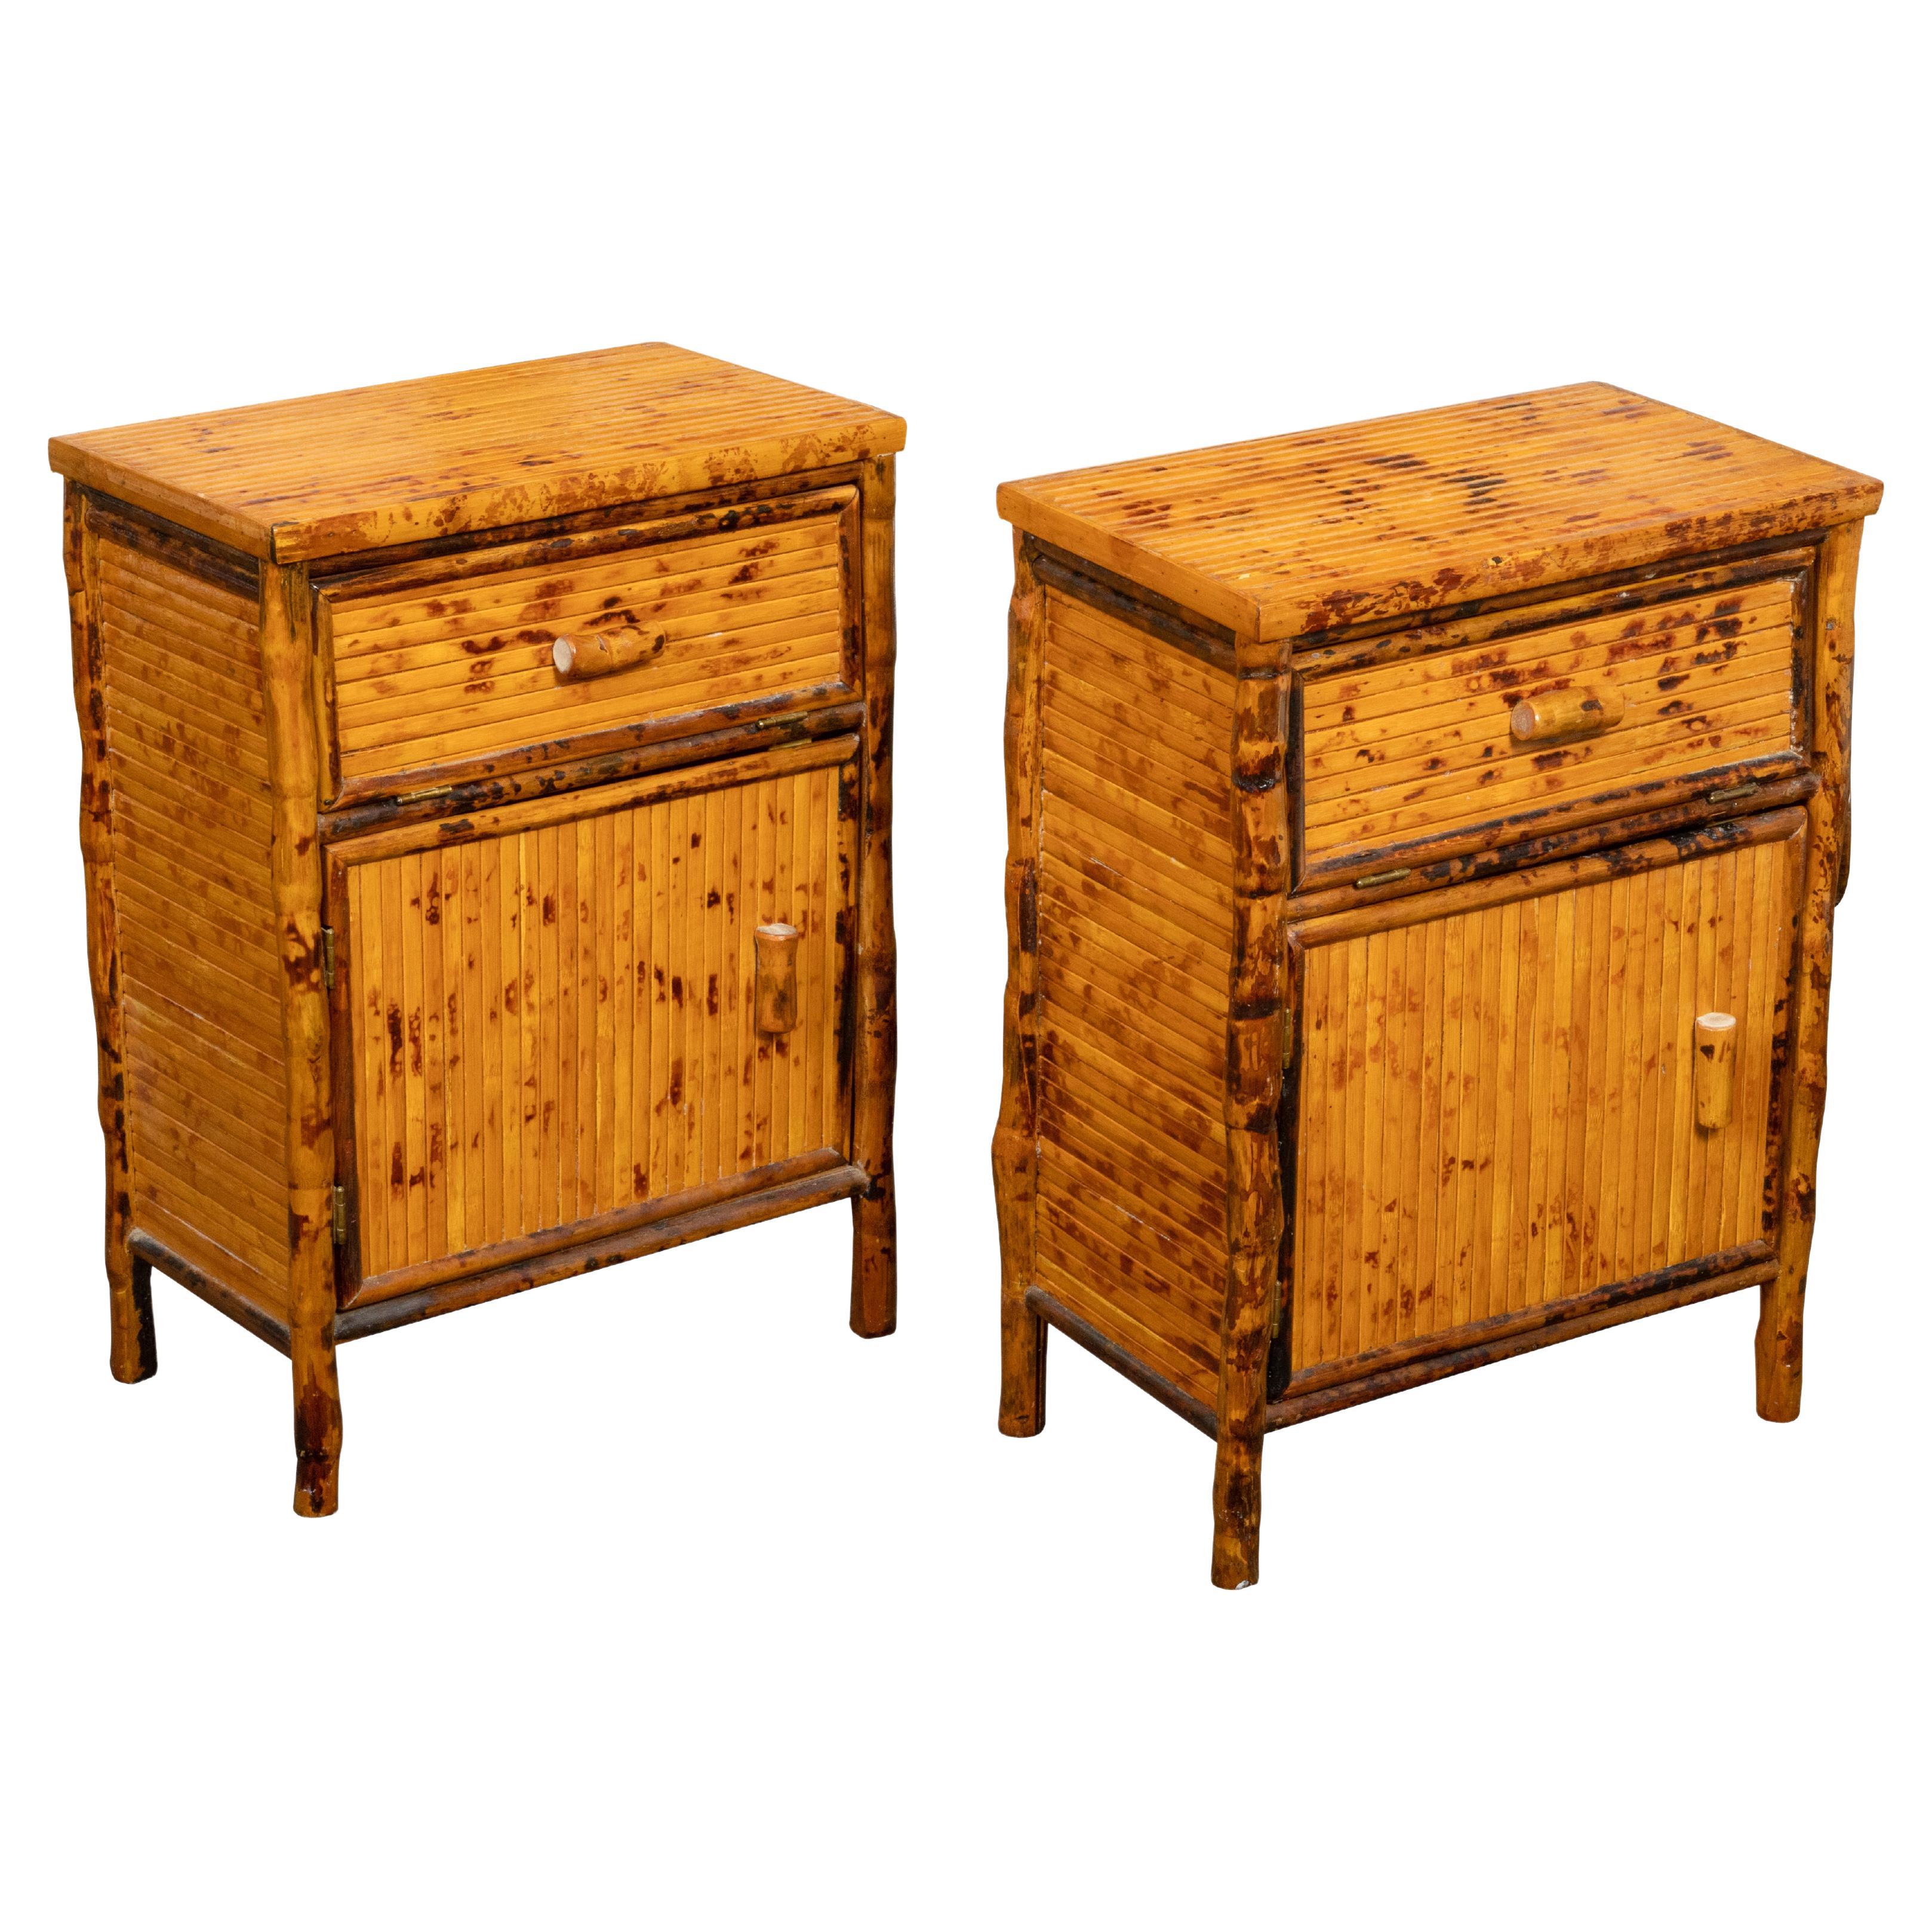 Vintage Pair of Mid-Century English Bamboo Bedside Cabinets with Doors